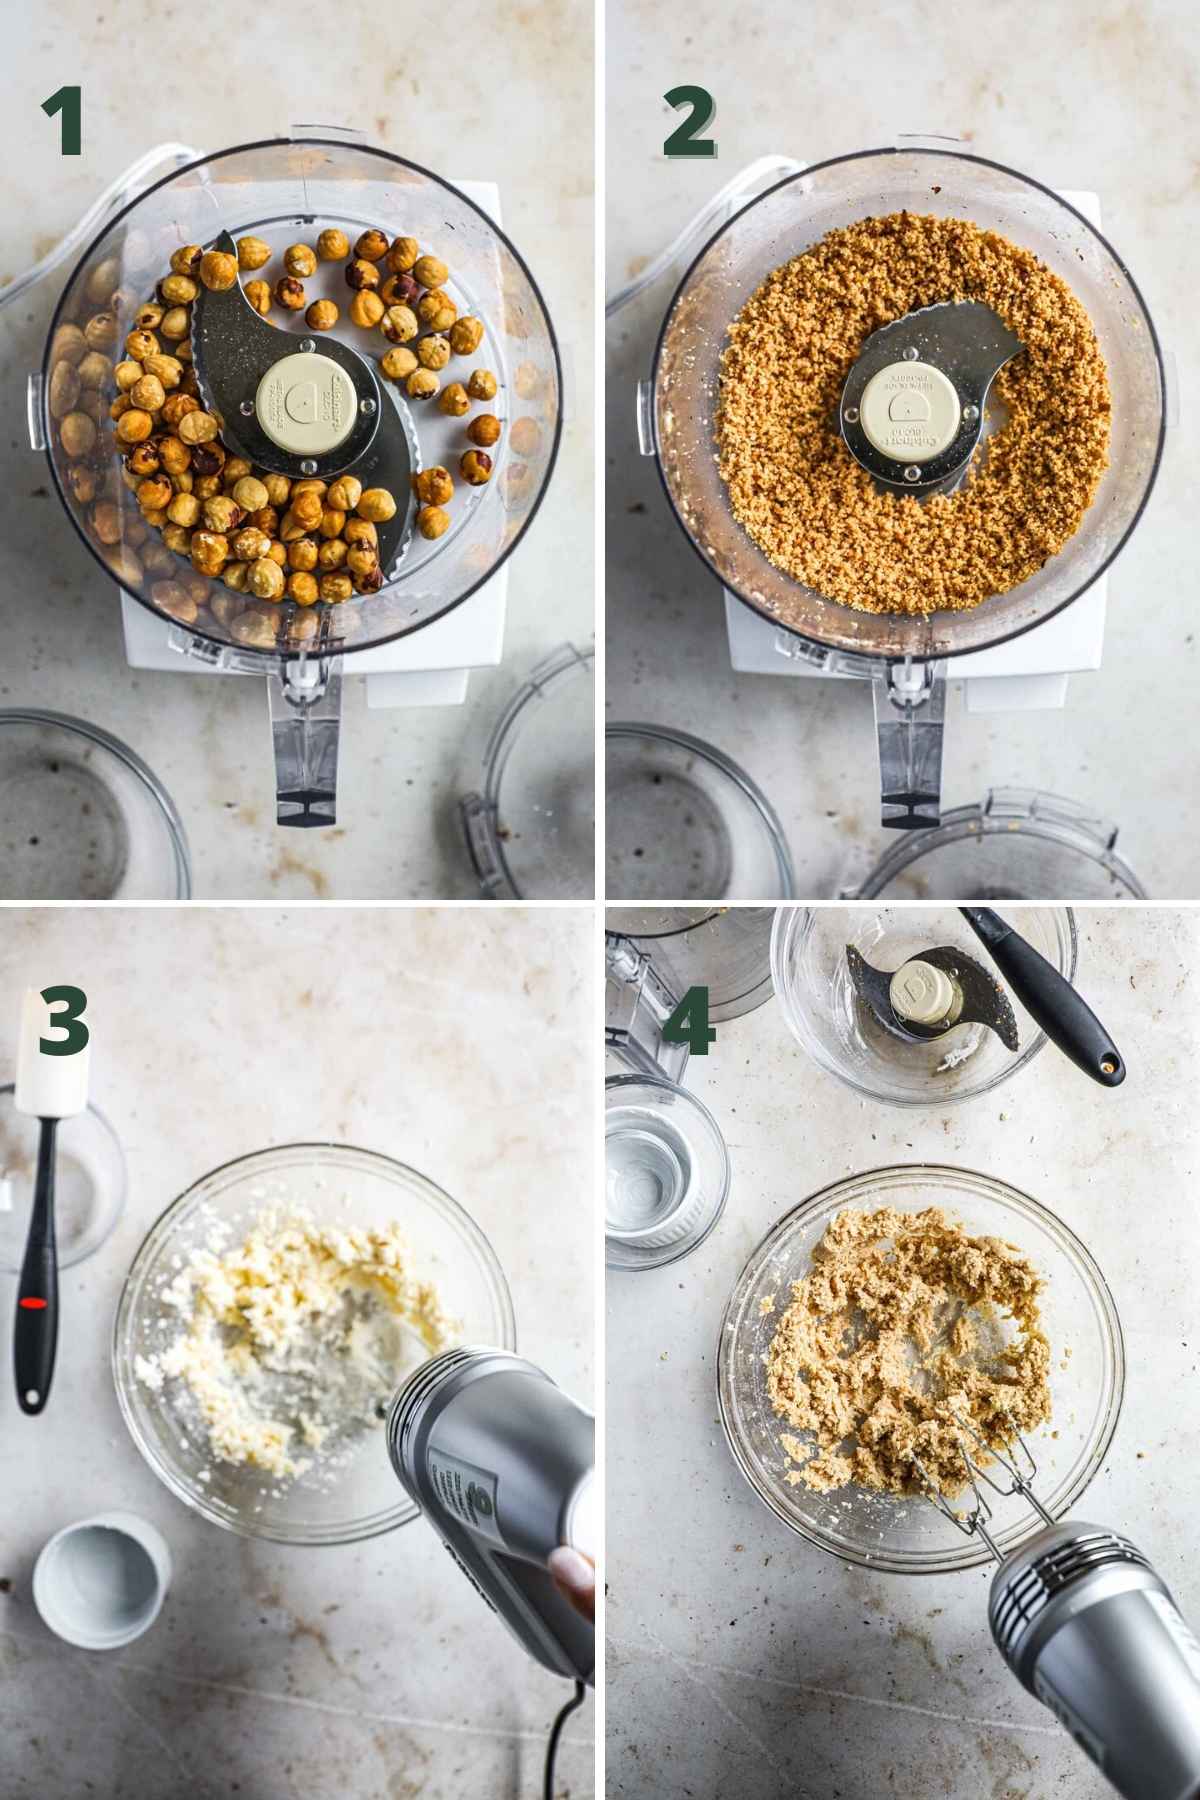 Steps to make baci di dama, including grinding the hazelnuts, whipping the butter and sugar, and adding the flour and hazelnuts.